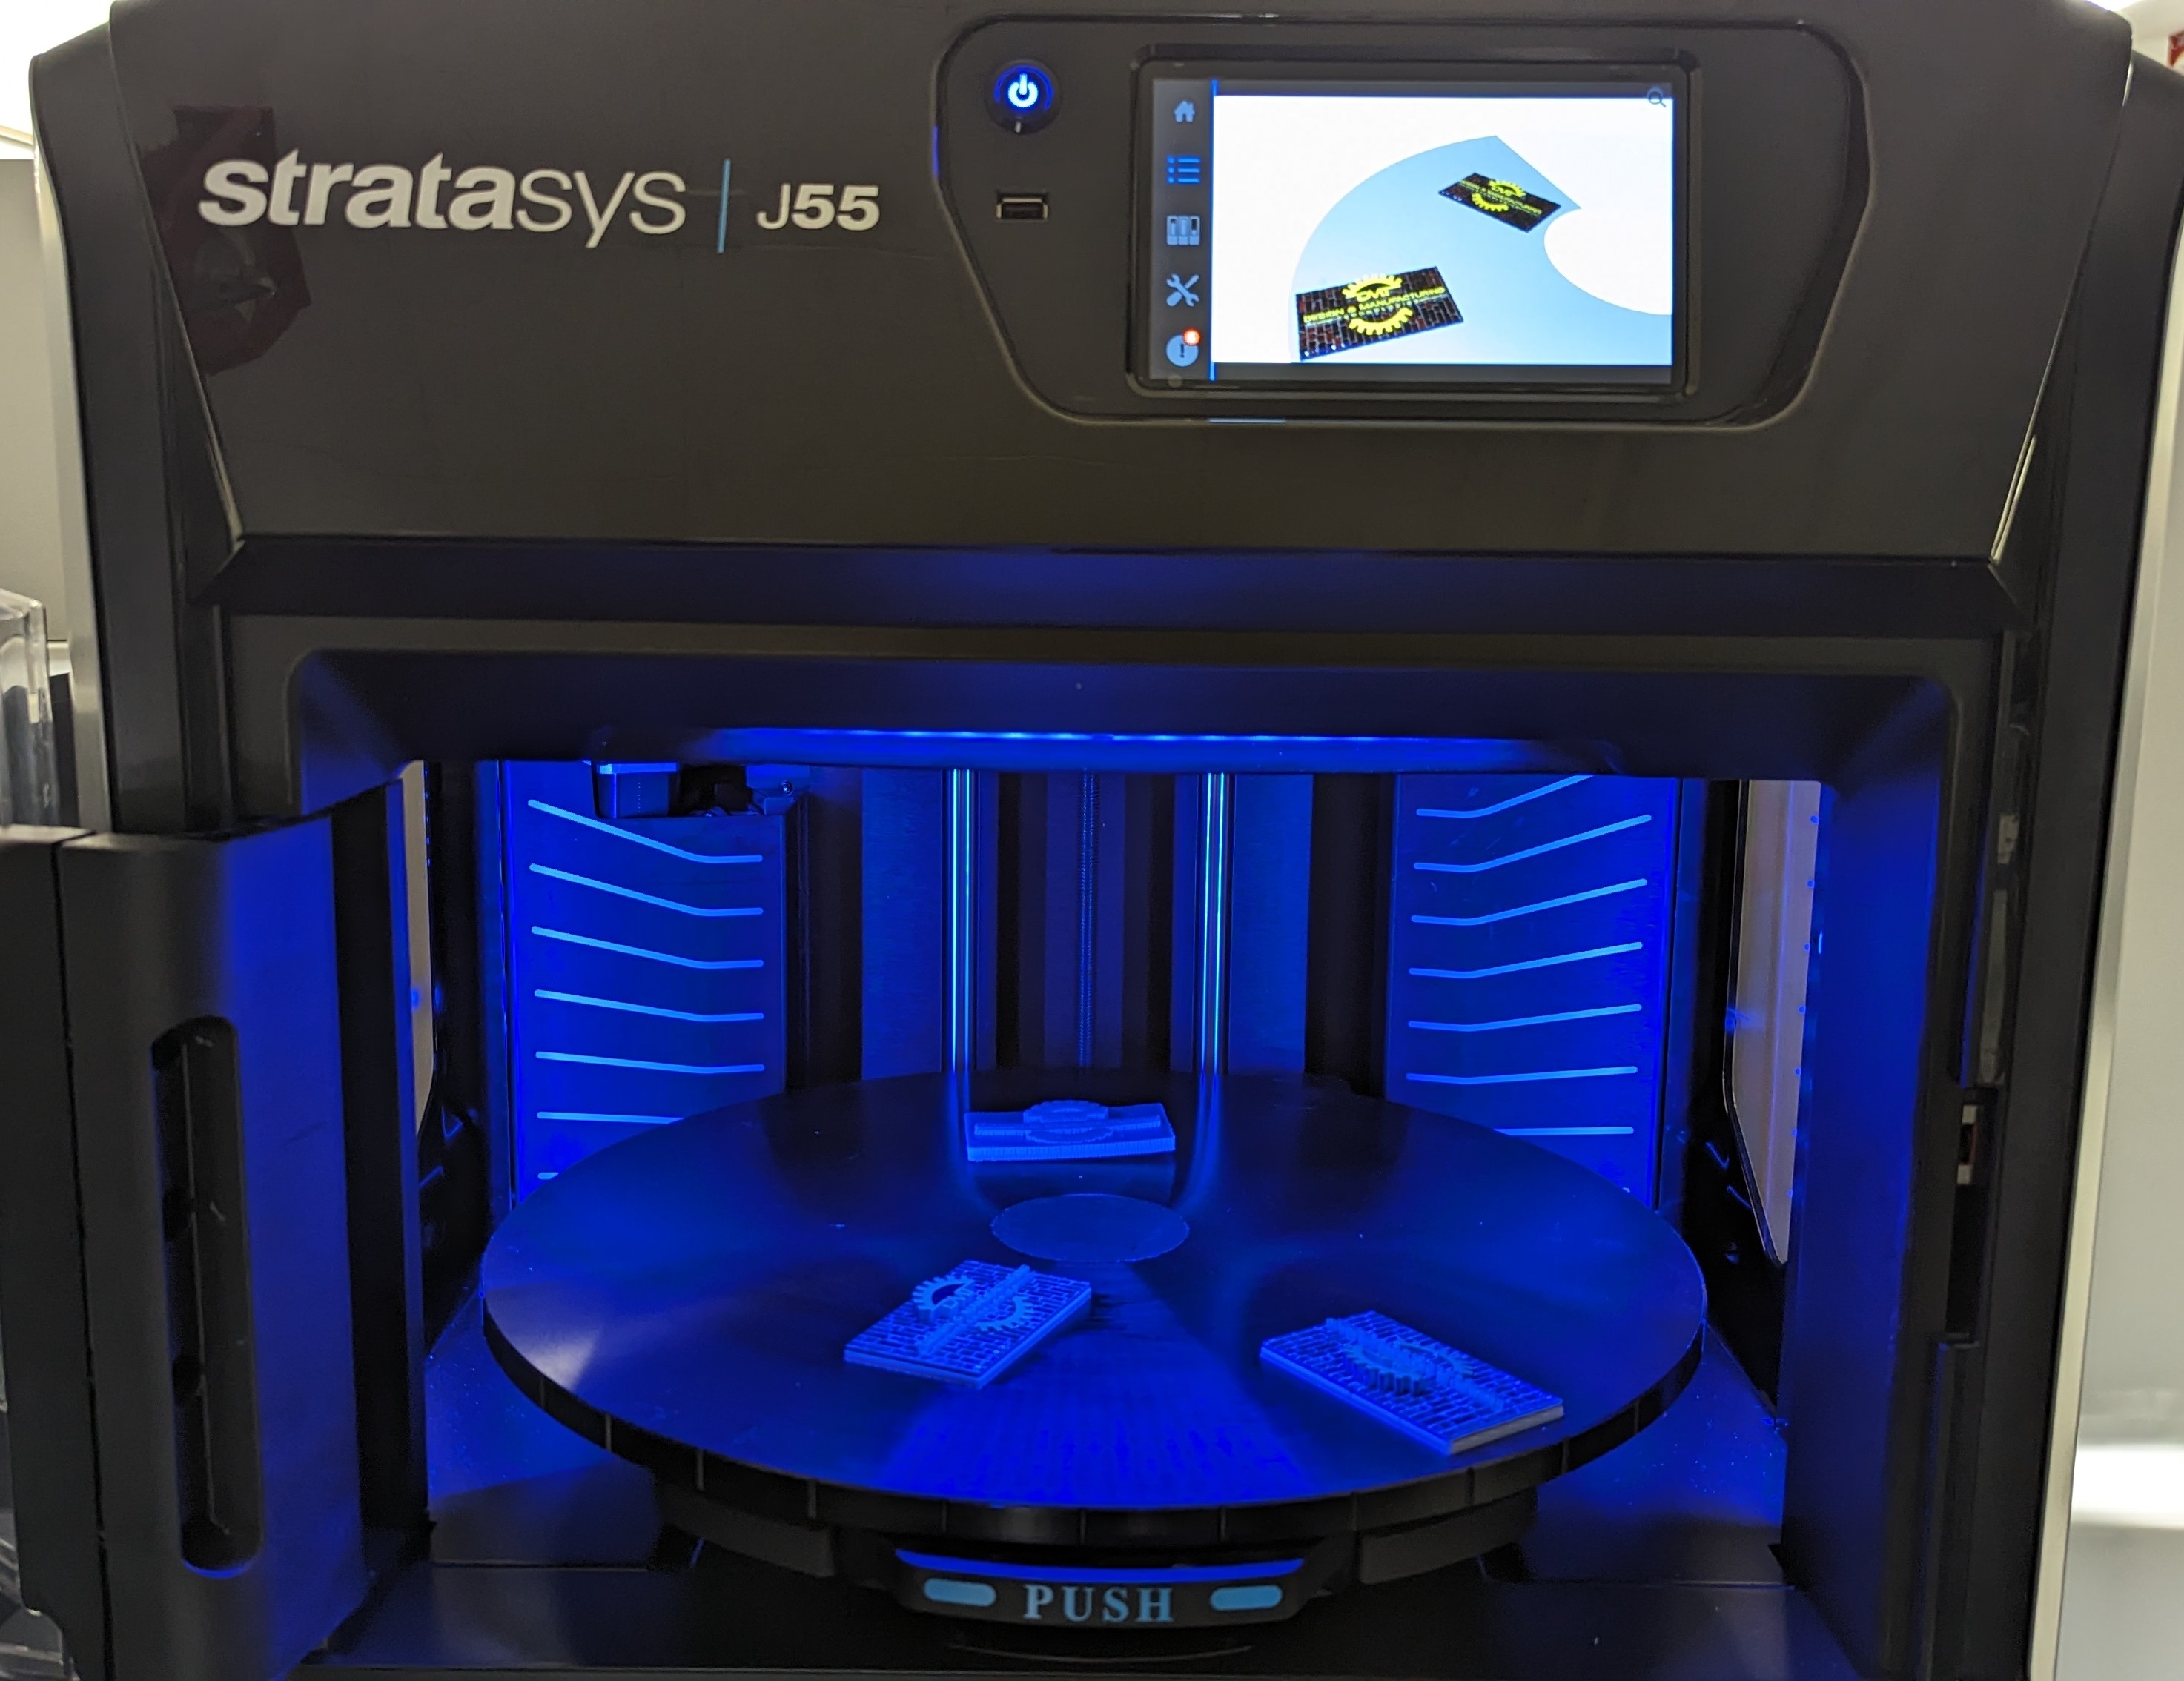 Stratasys J55 with Business Cards